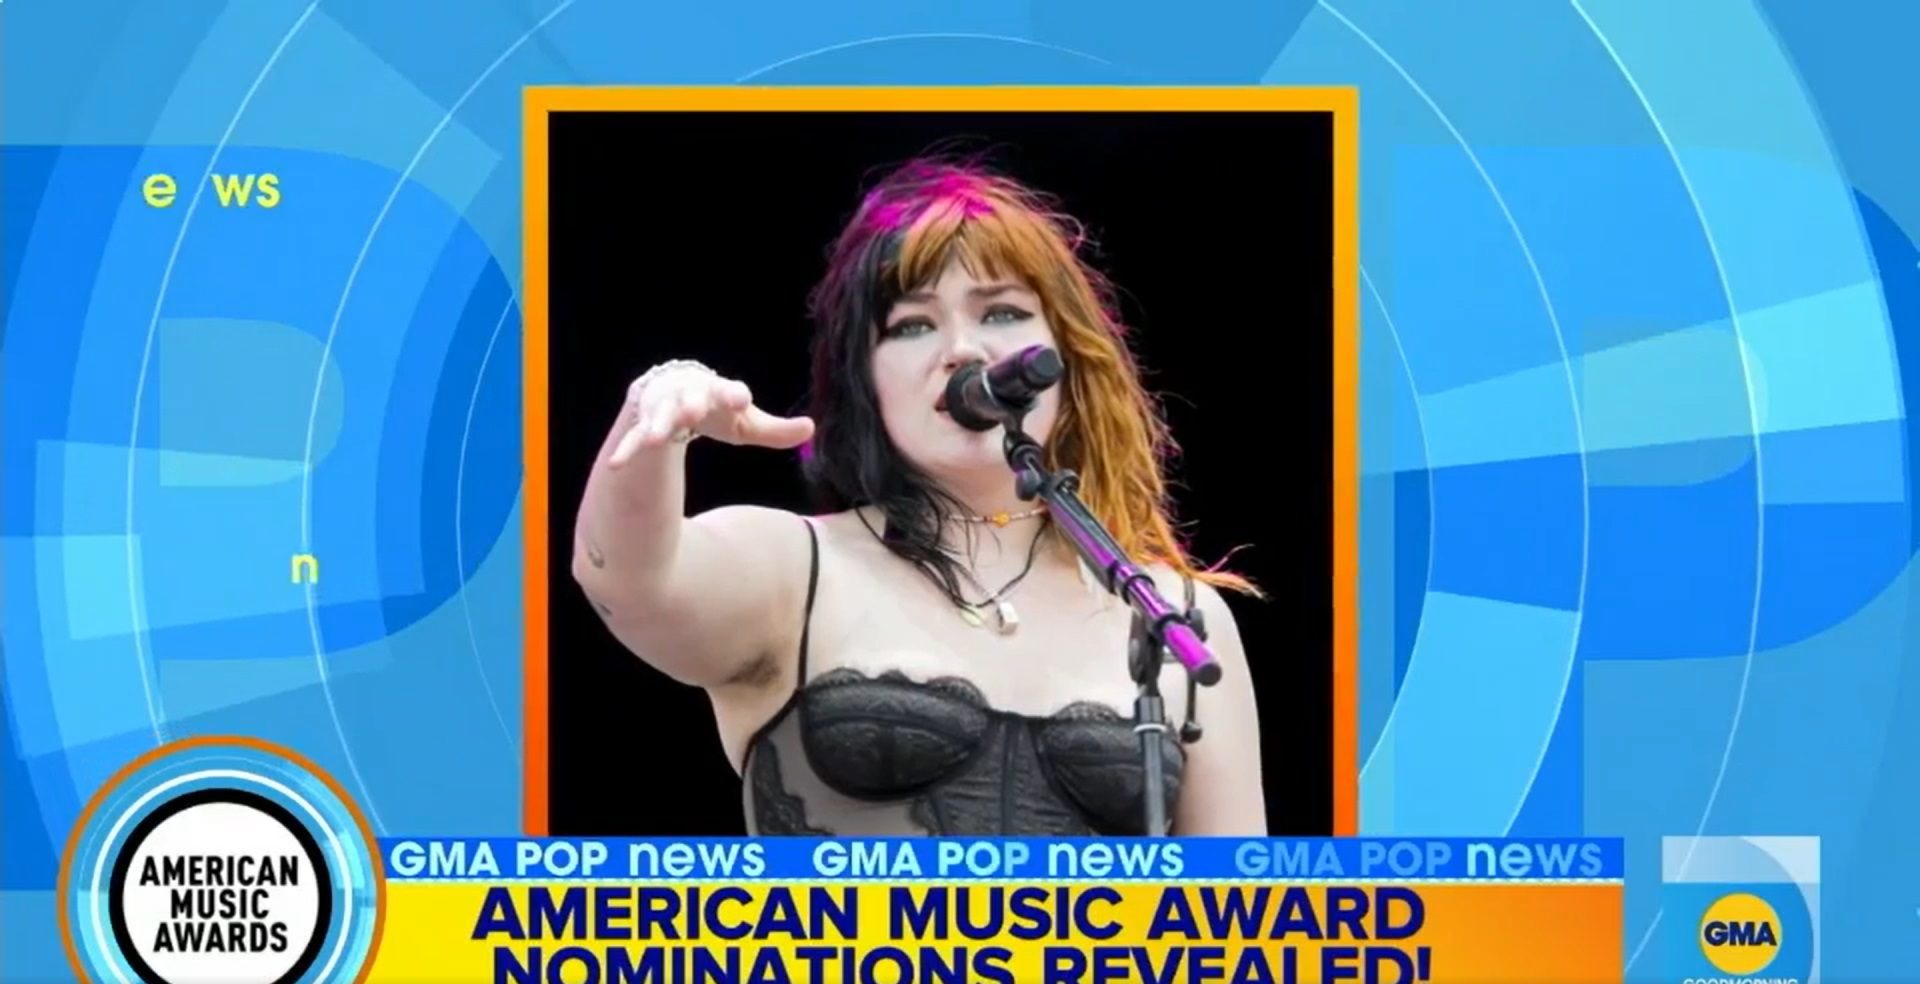 American Music Awards 2022 nominees